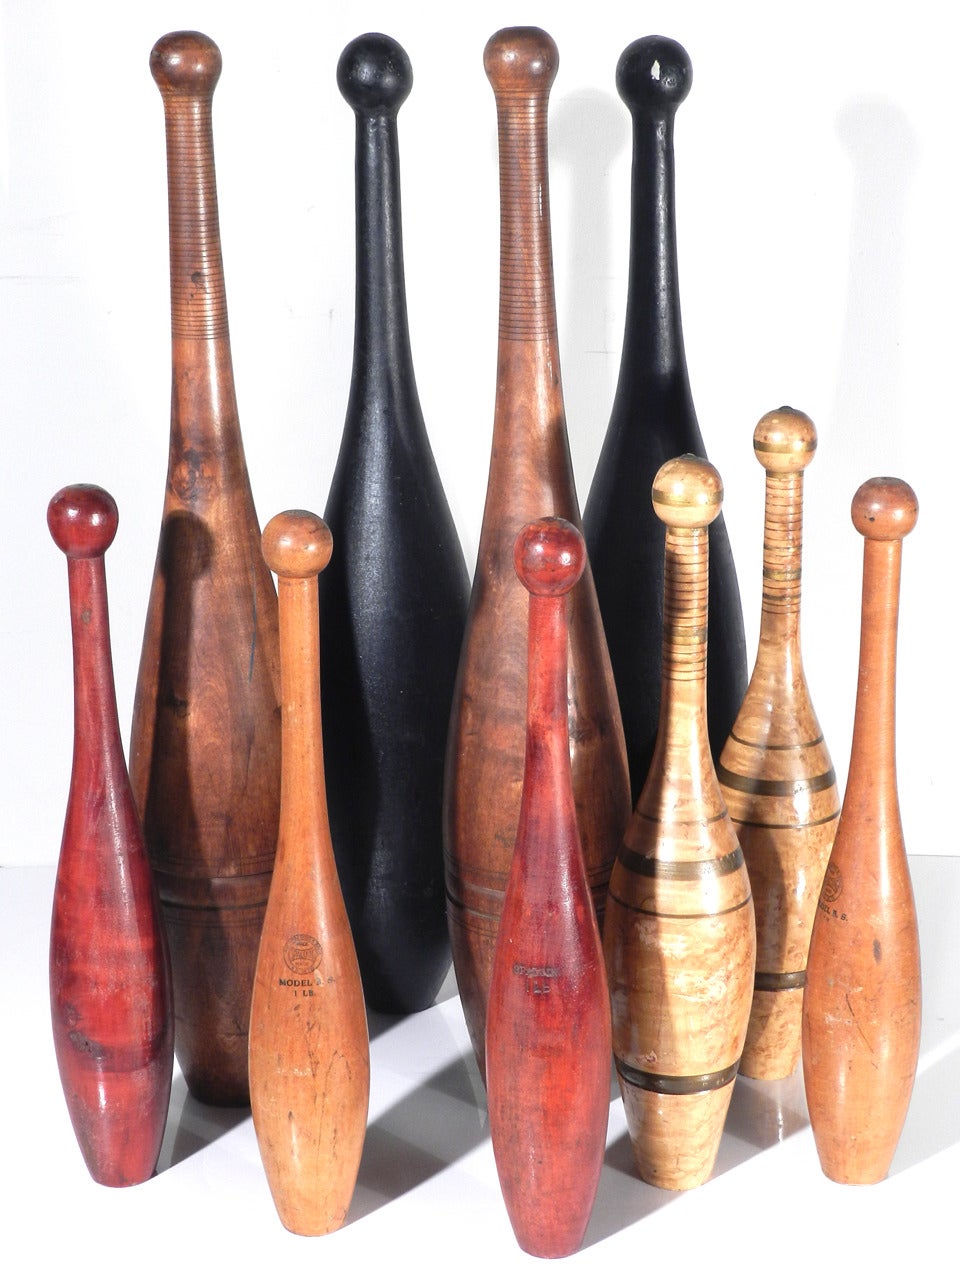 This is a wonderful collection of ten Victorian Era Indian Clubs. There are five matching pairs in excellent original paint and a beautiful patina. They range in size from over two foot to 16 inches. As a group they make an impressive